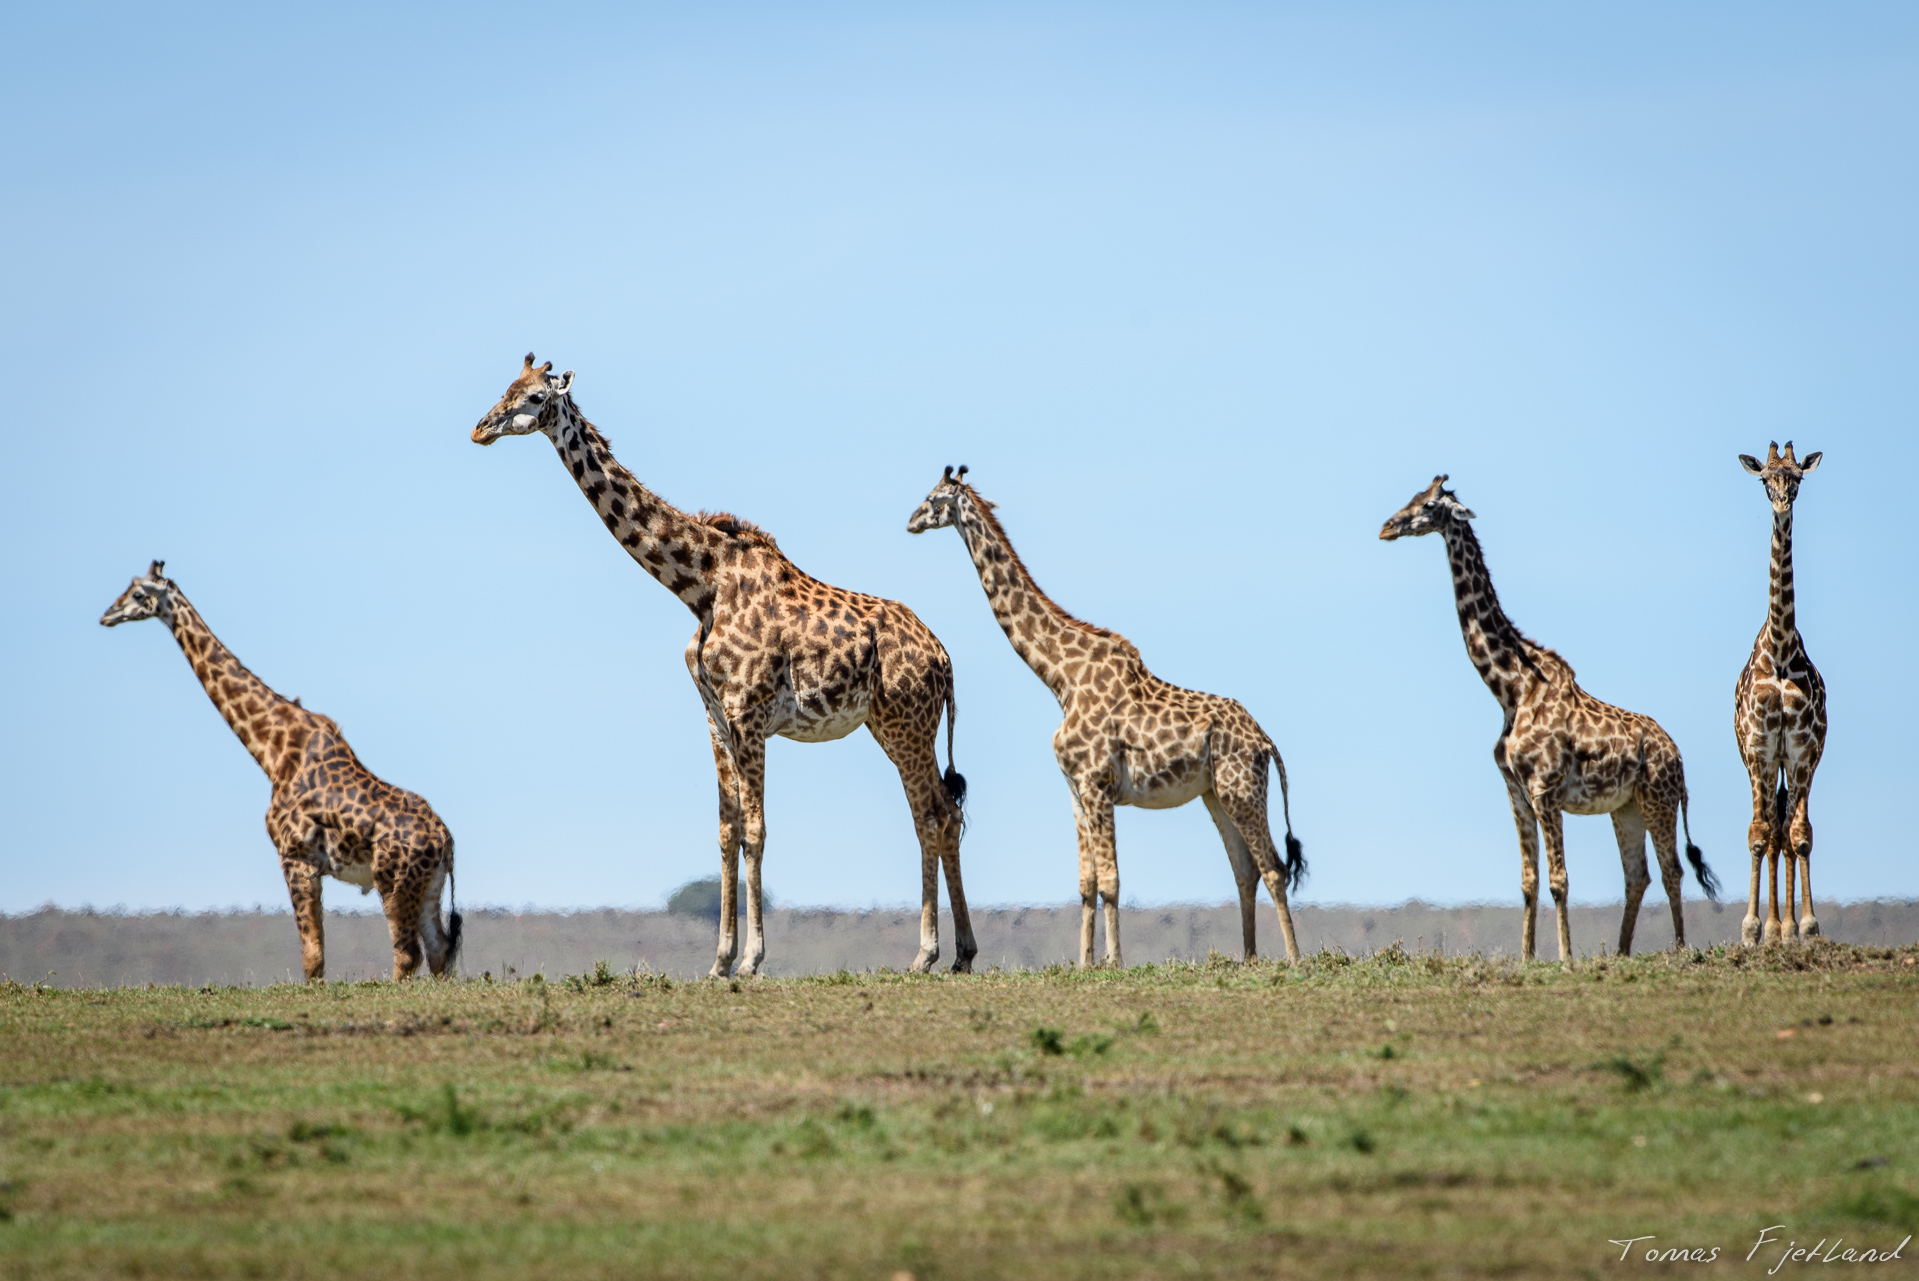 A group of Mara Giraffes gathered out in the open of the savannah